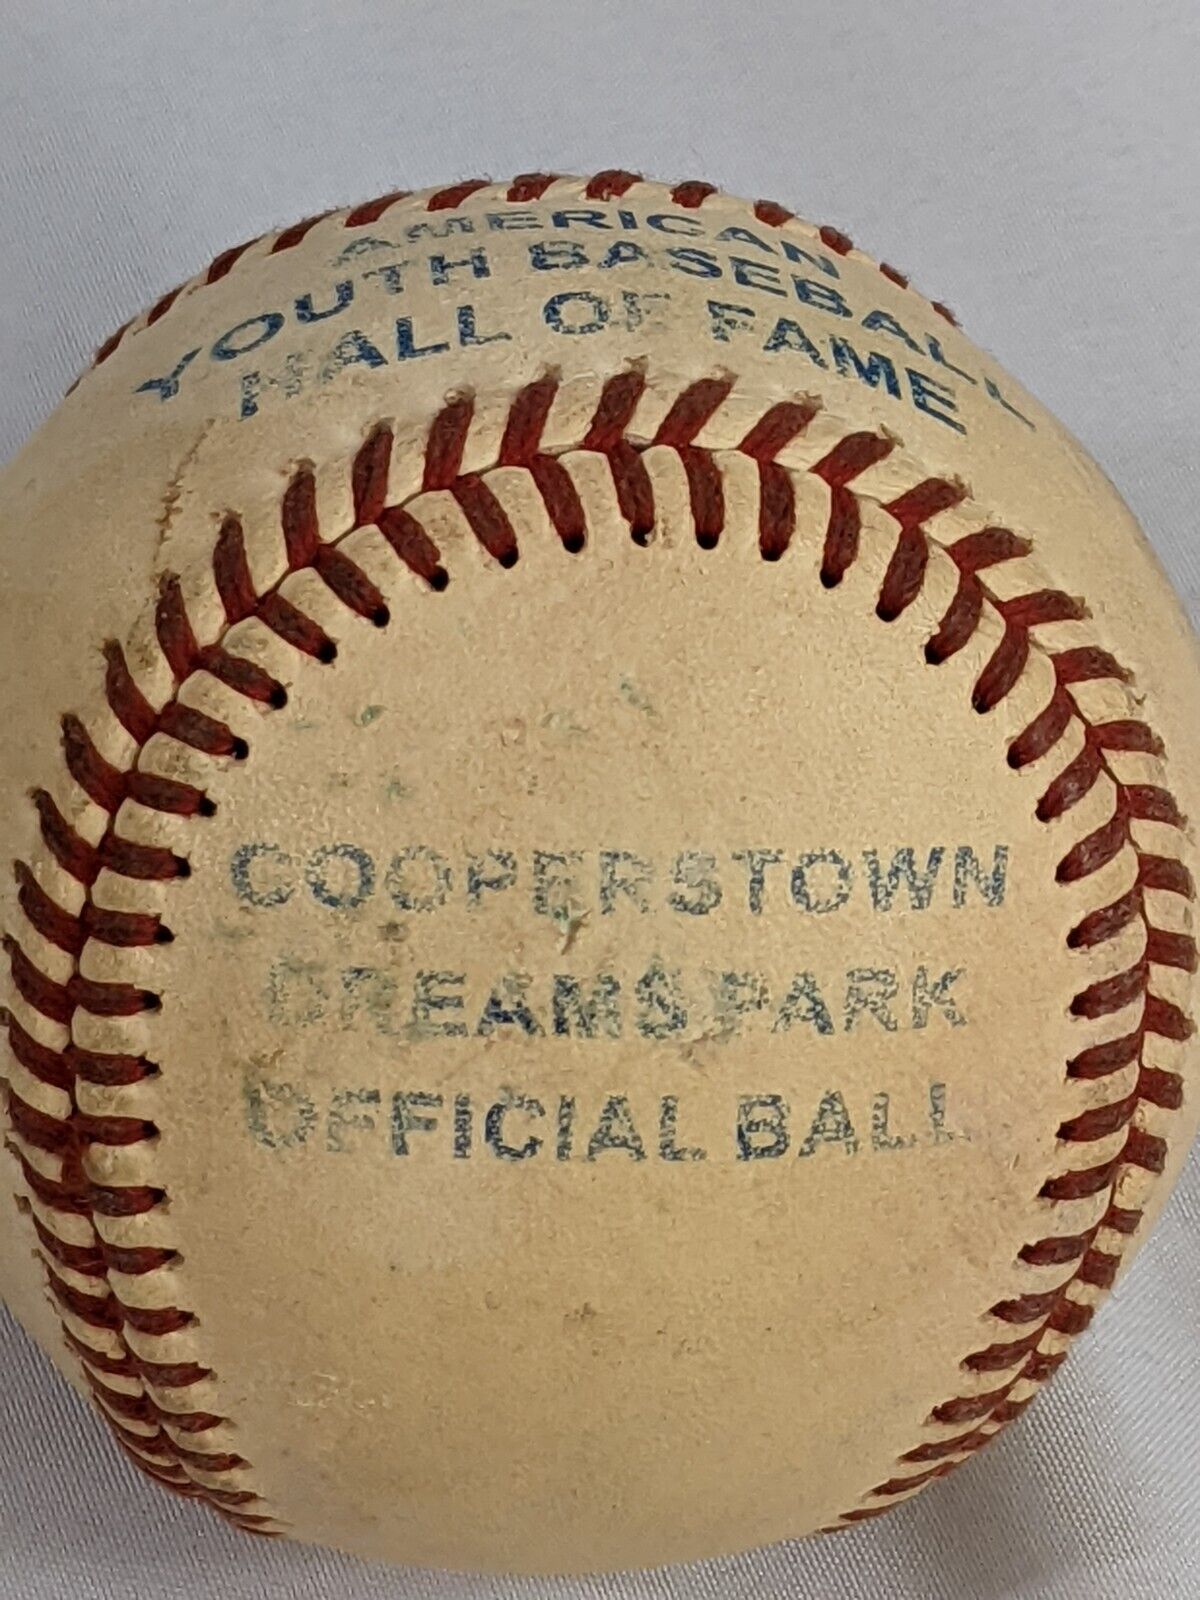 Cooperstown Dreams Park Official Ball American Youth Baseball Hall of Fame